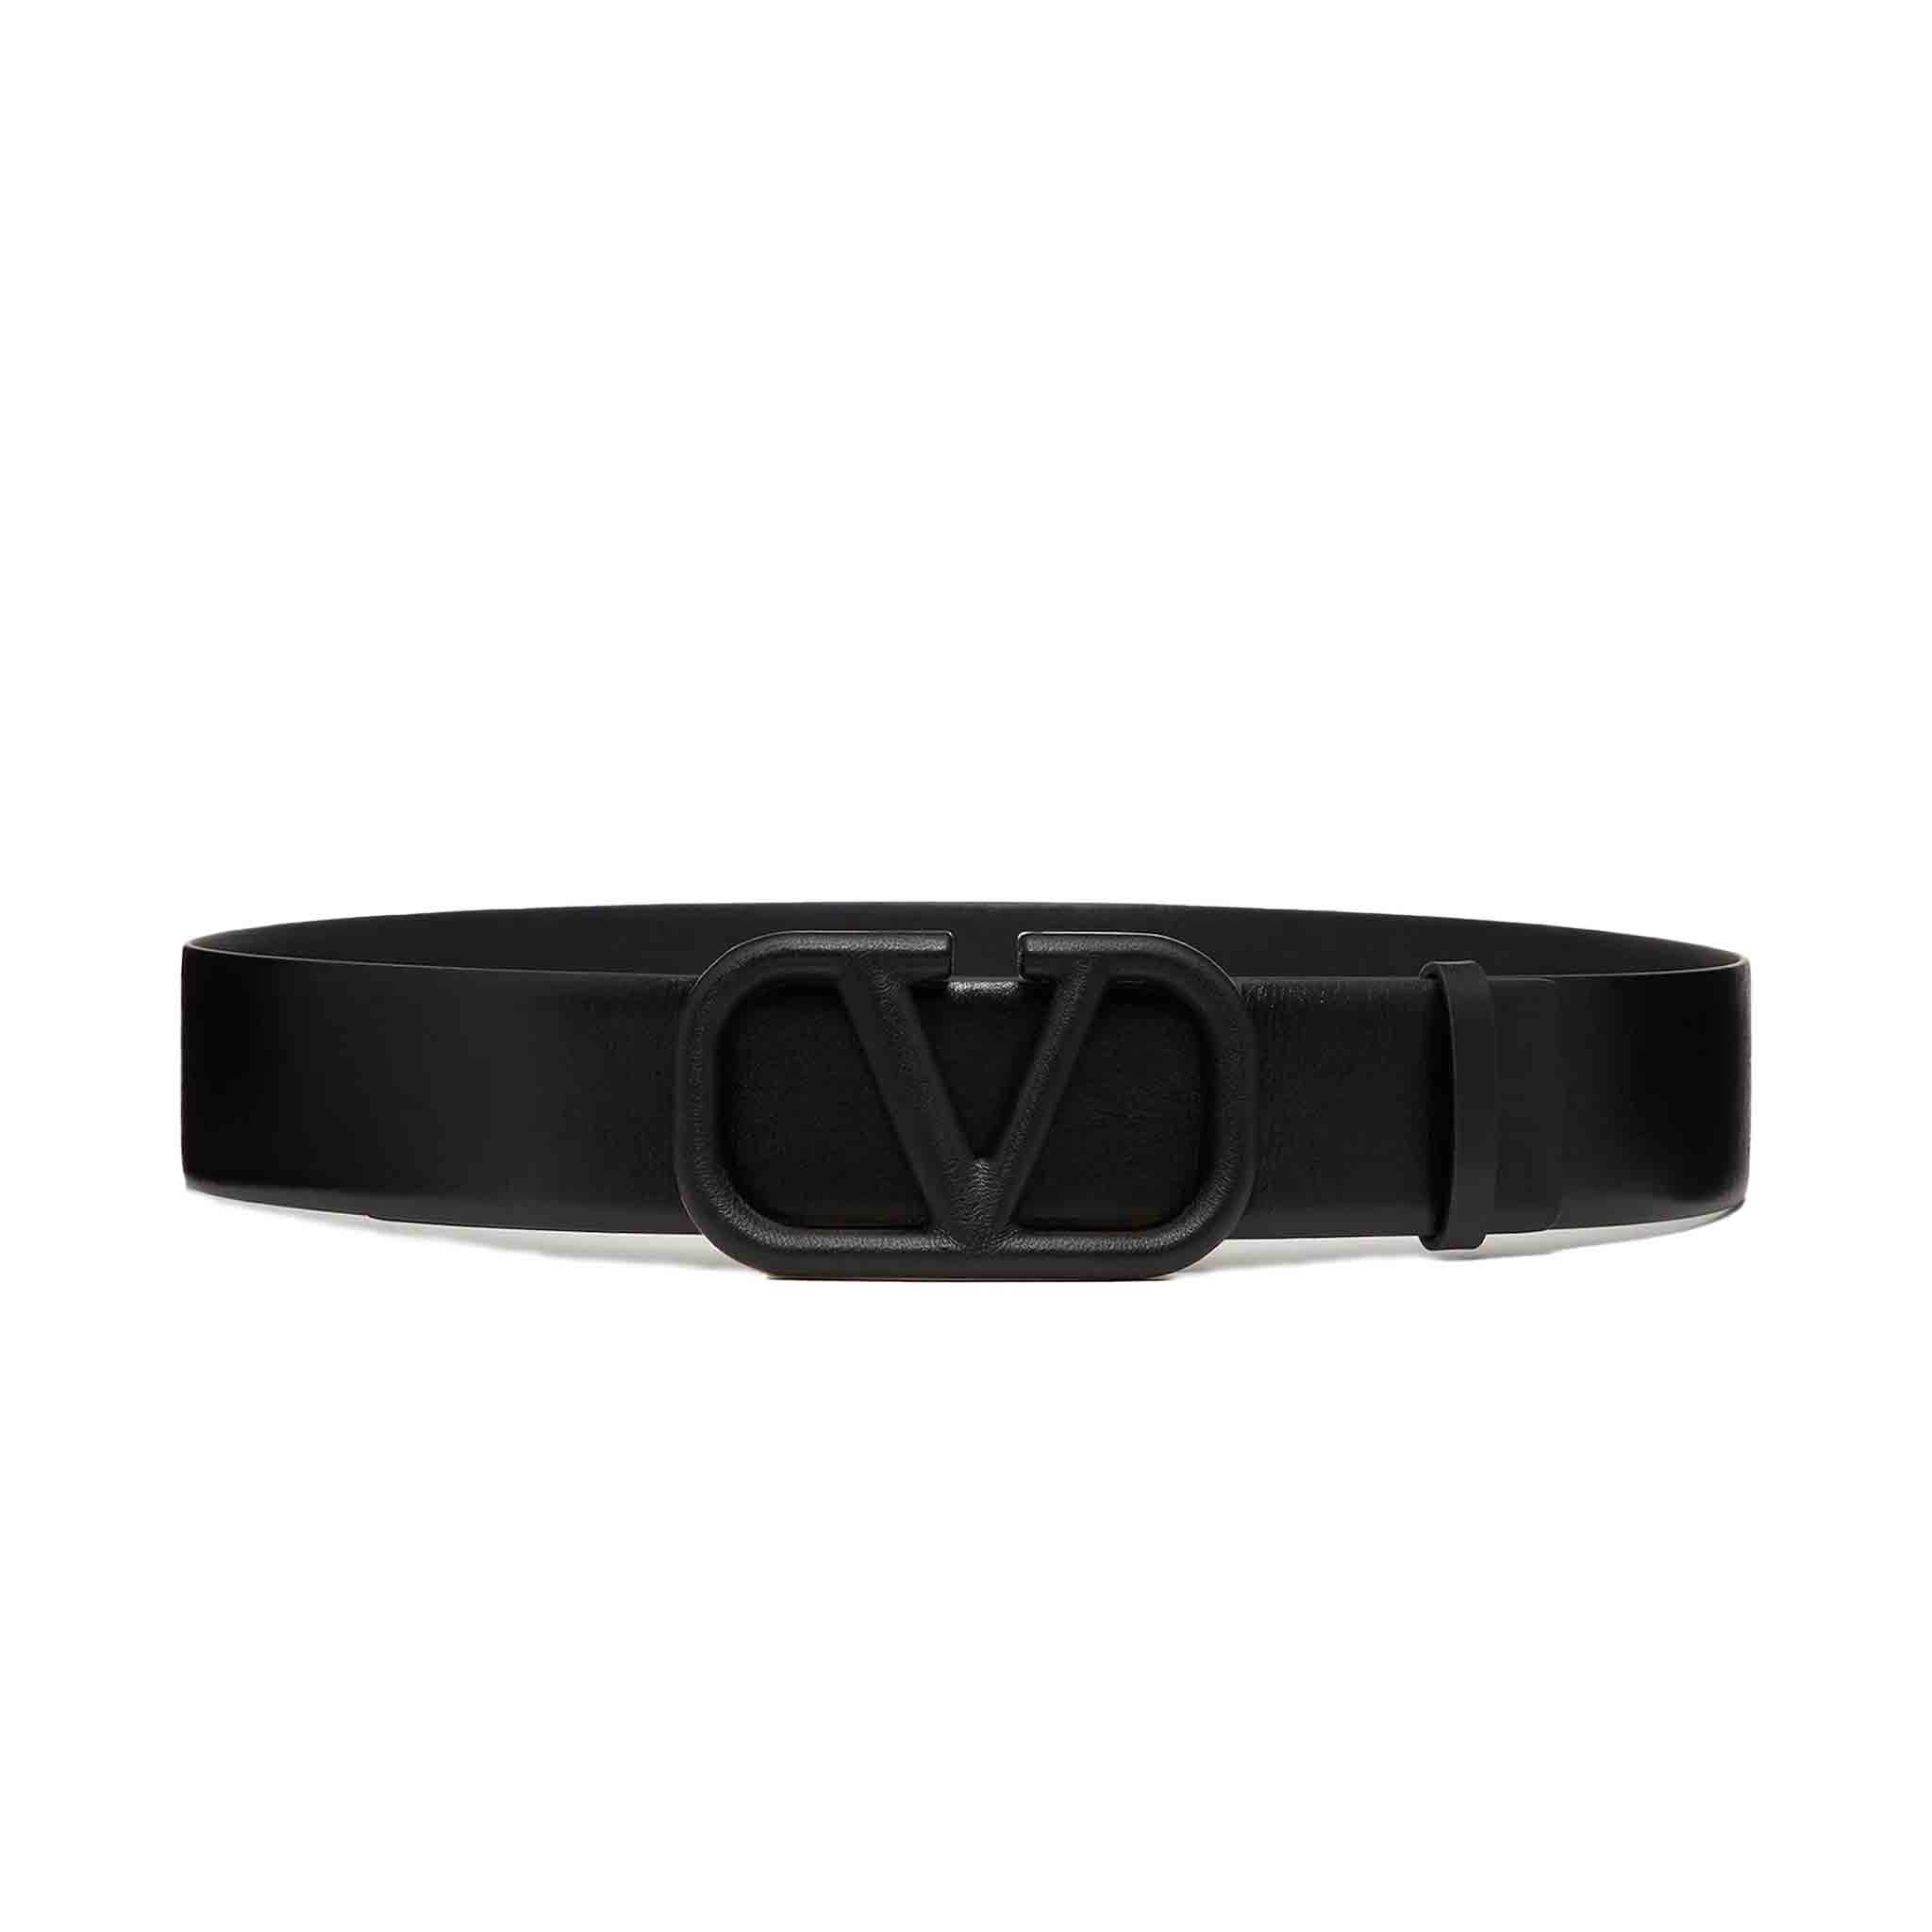 This stylish Valentino Garavani V Logo Signature belt is made of high-quality calfskin leather and features ruthenium-finish hardware. It has a lacquered V Logo Signature buckle and comes in sizes 100/105. The belt is 40 mm wide and is made in Italy A fashionable and practical accessory for any outfit.